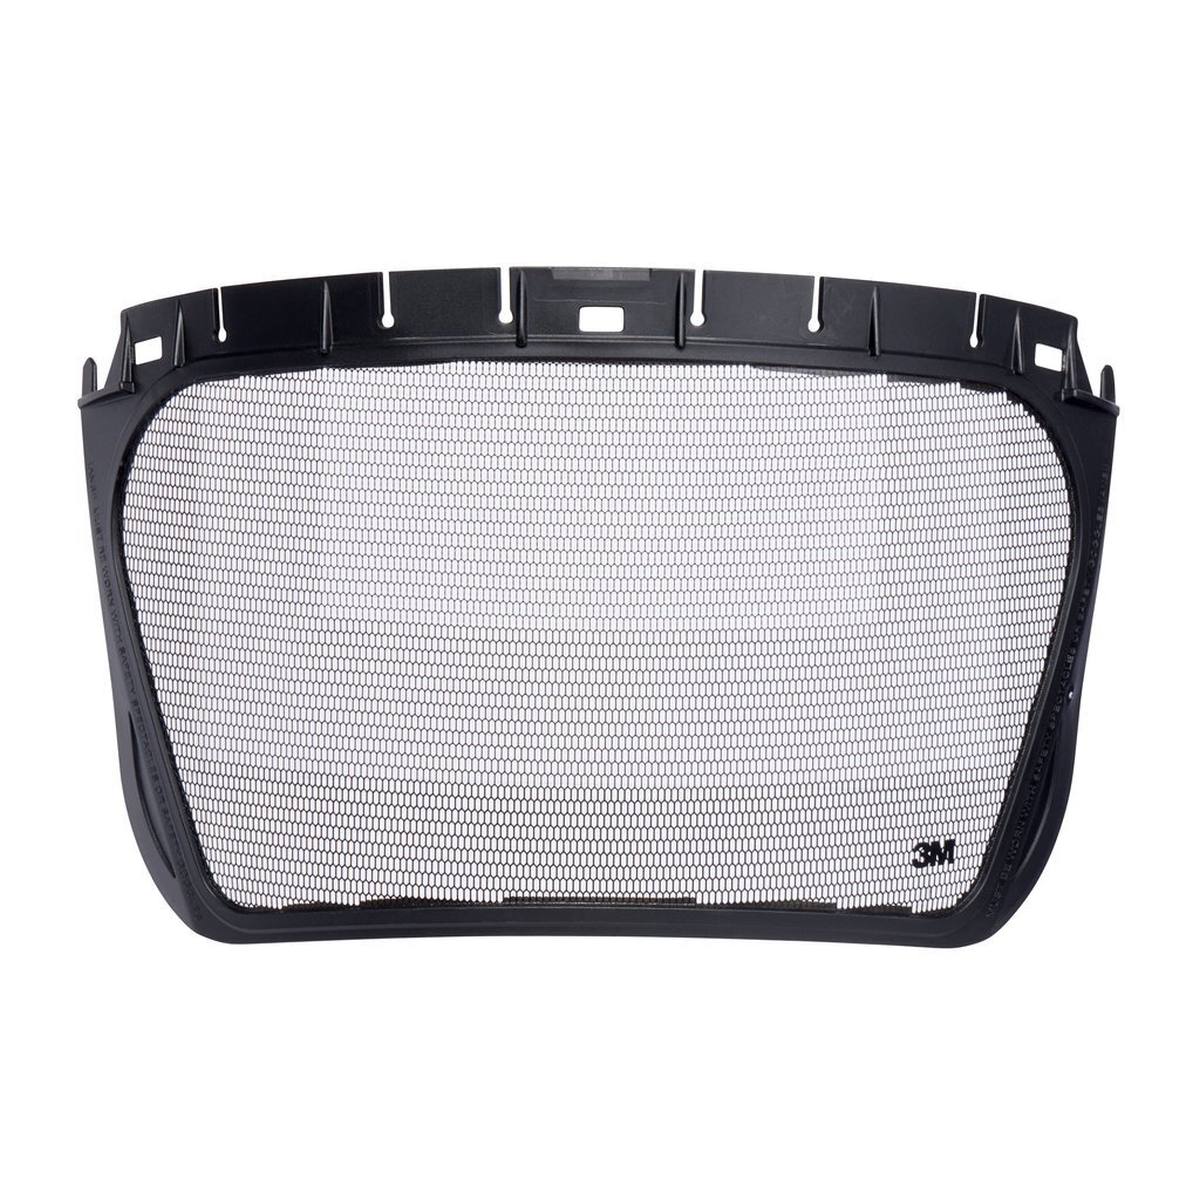 3M 5J Mesh visor Etched stainless steel Mesh size: 0.15mm Light reduction: min. 17%, max. 37%, Weight: 54g Available separately: V5 bracket for 3M safety helmets